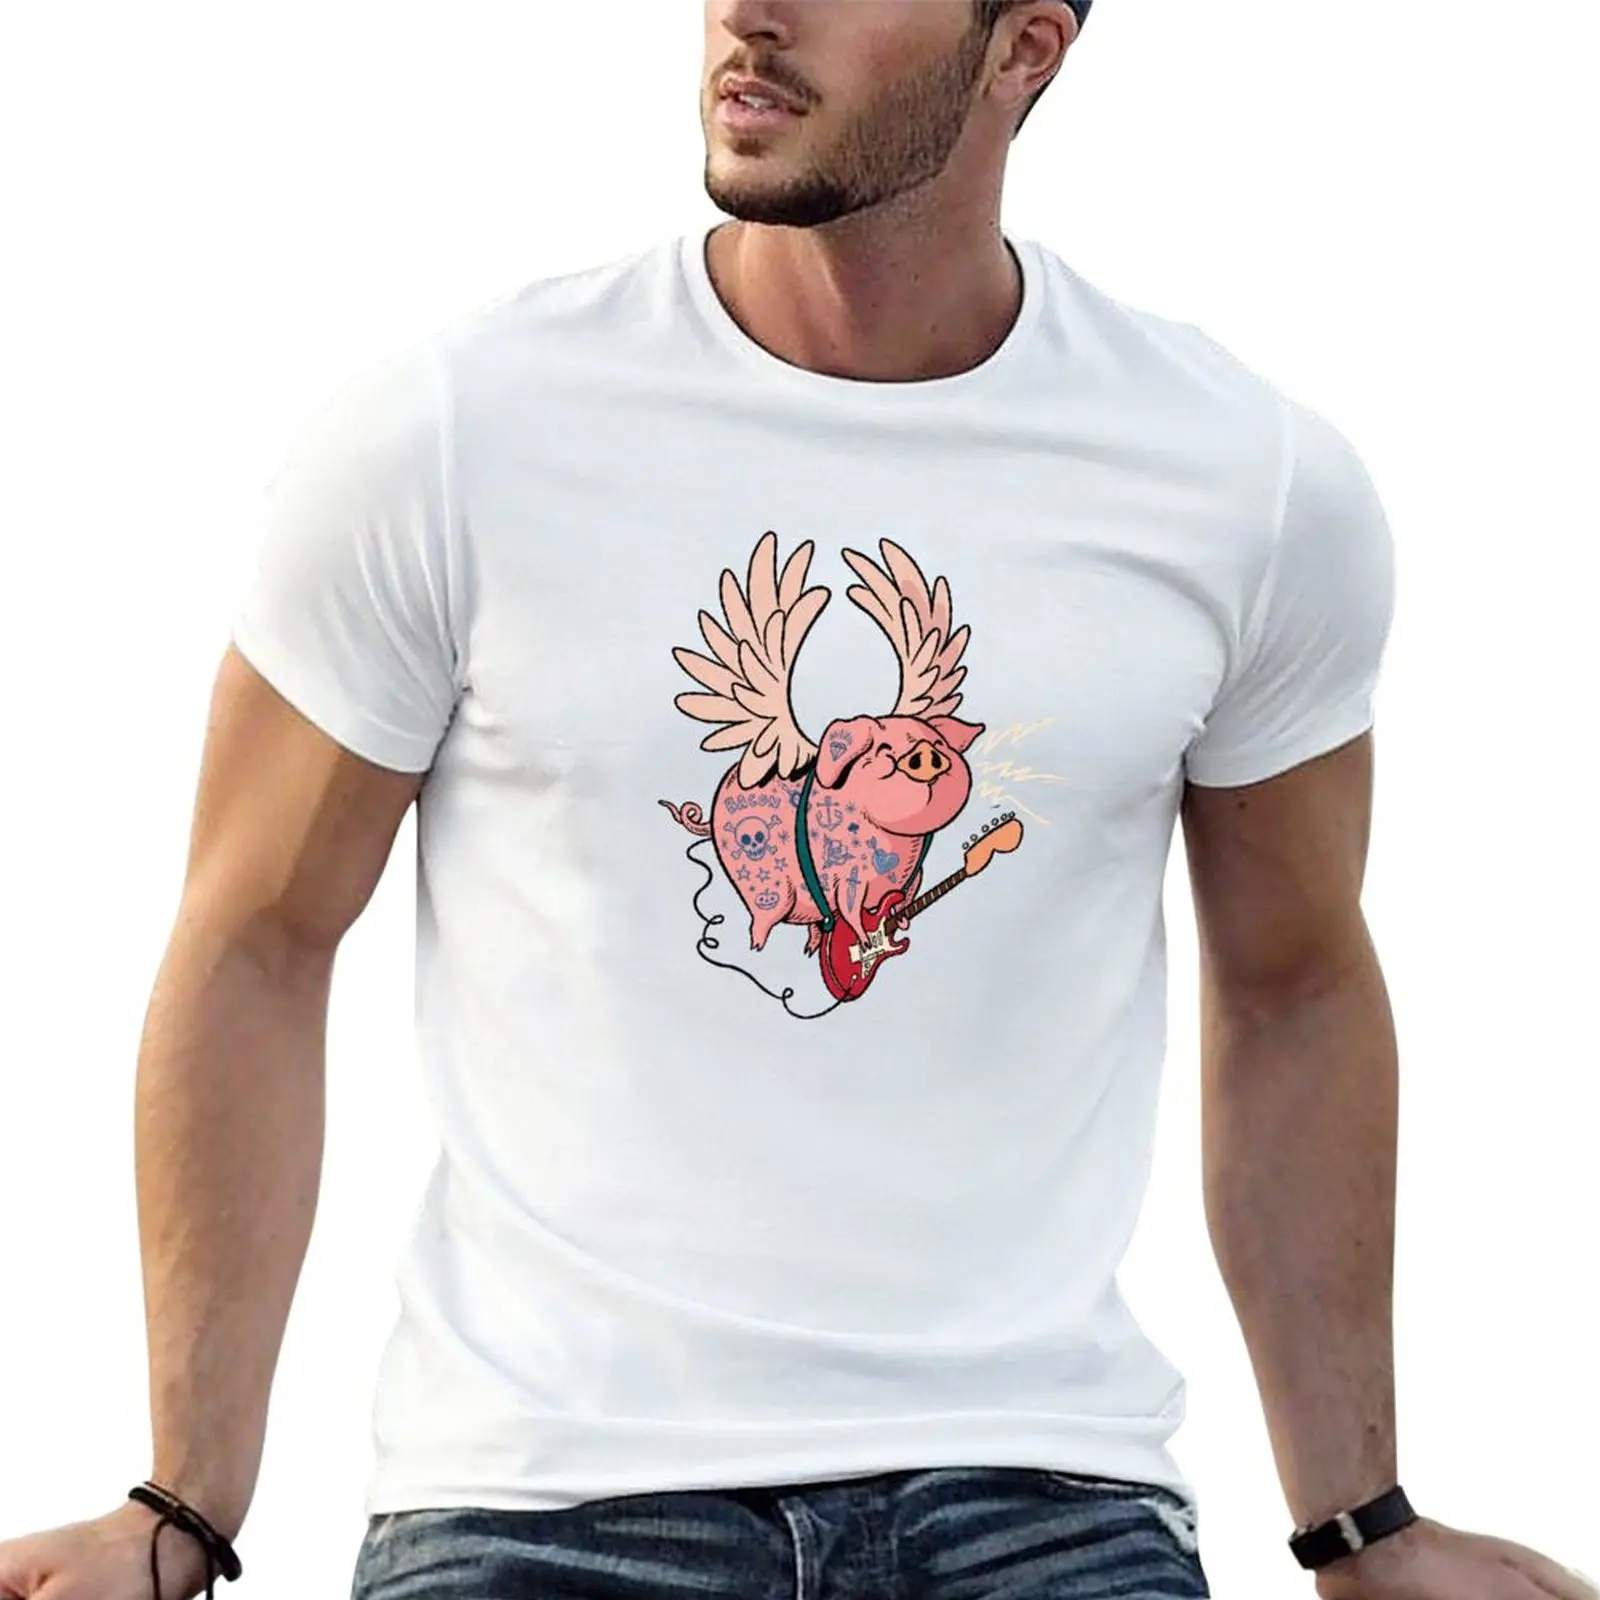 

New Pigs Rock! Cute Tattoo Flying Pig playing guitar T-Shirt Oversized t-shirt tees slim fit t shirts for men